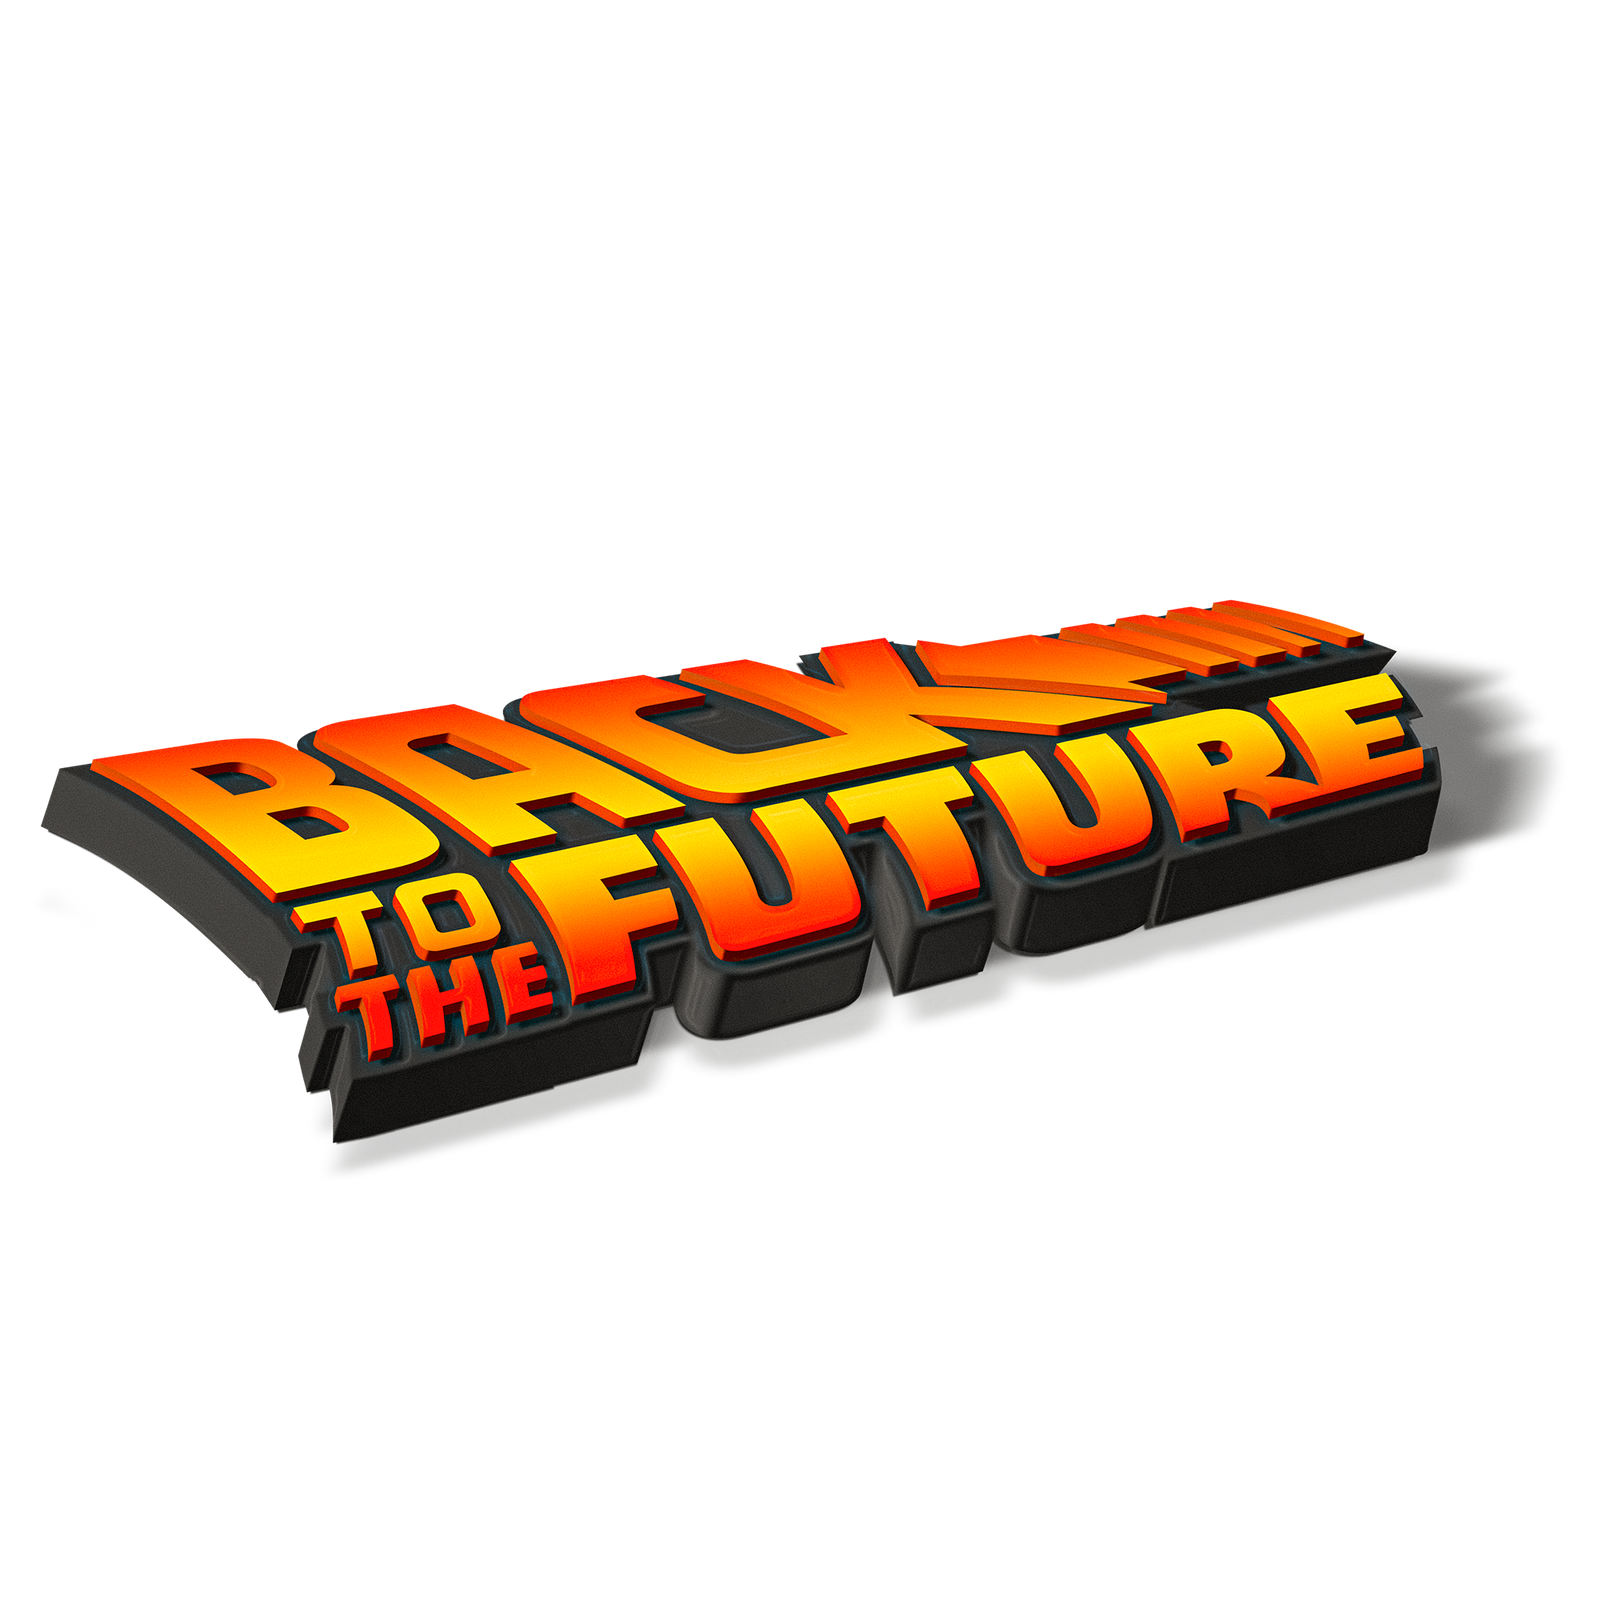 Back to the Future logo.